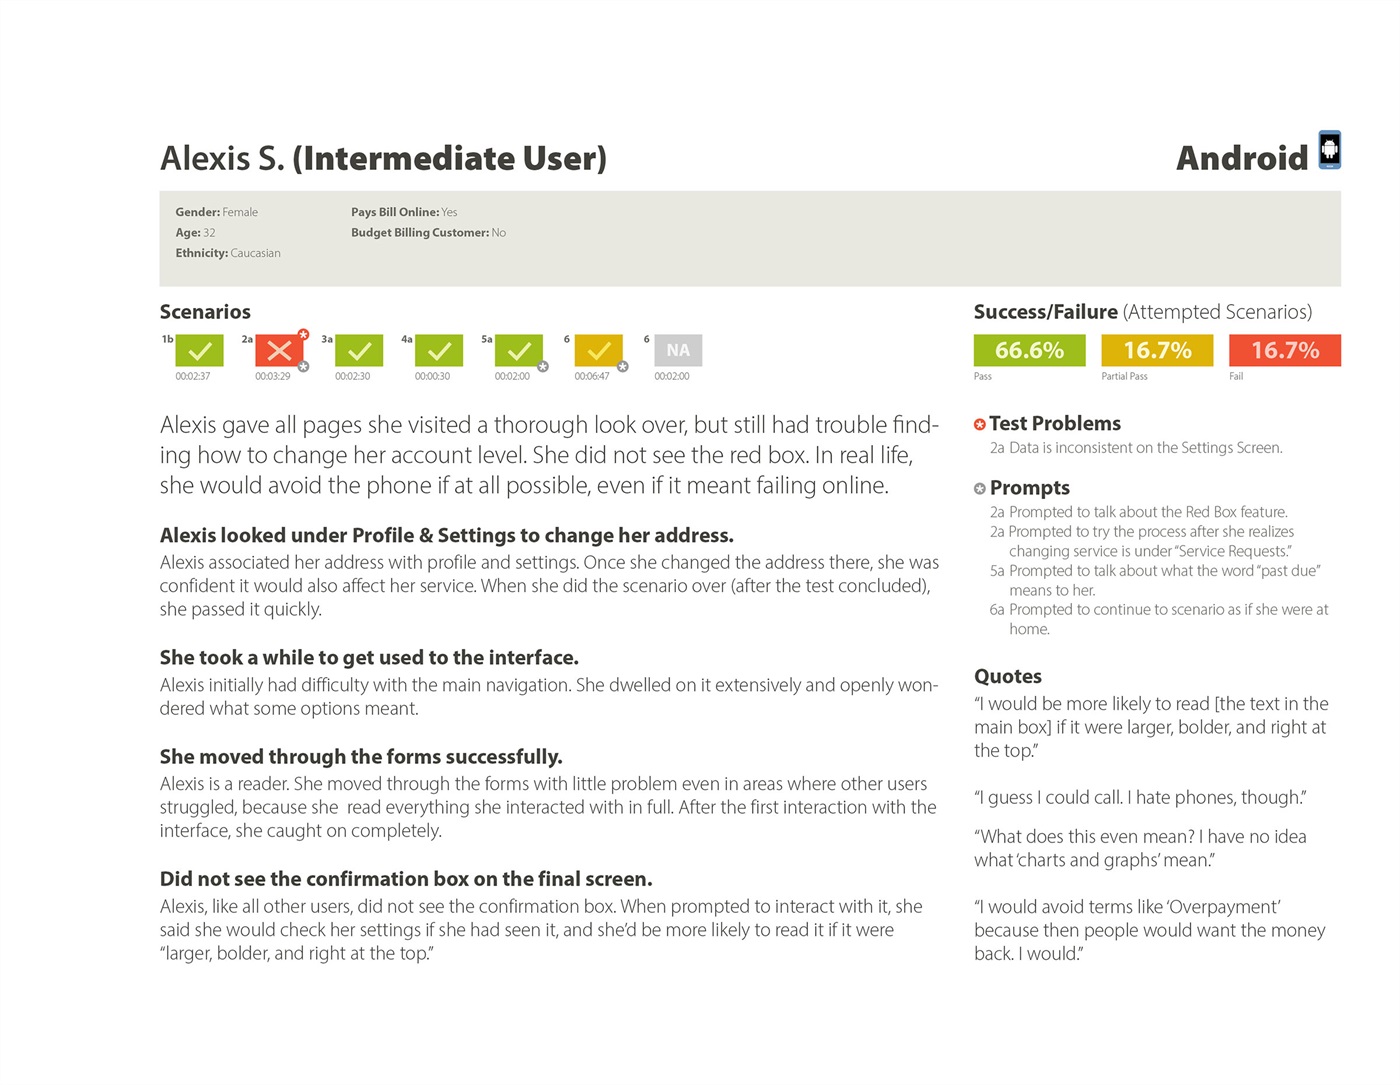 User profile page showing how an intermediate user completed an assigned task along with a visual representation of the user's experience and success/failure rate.